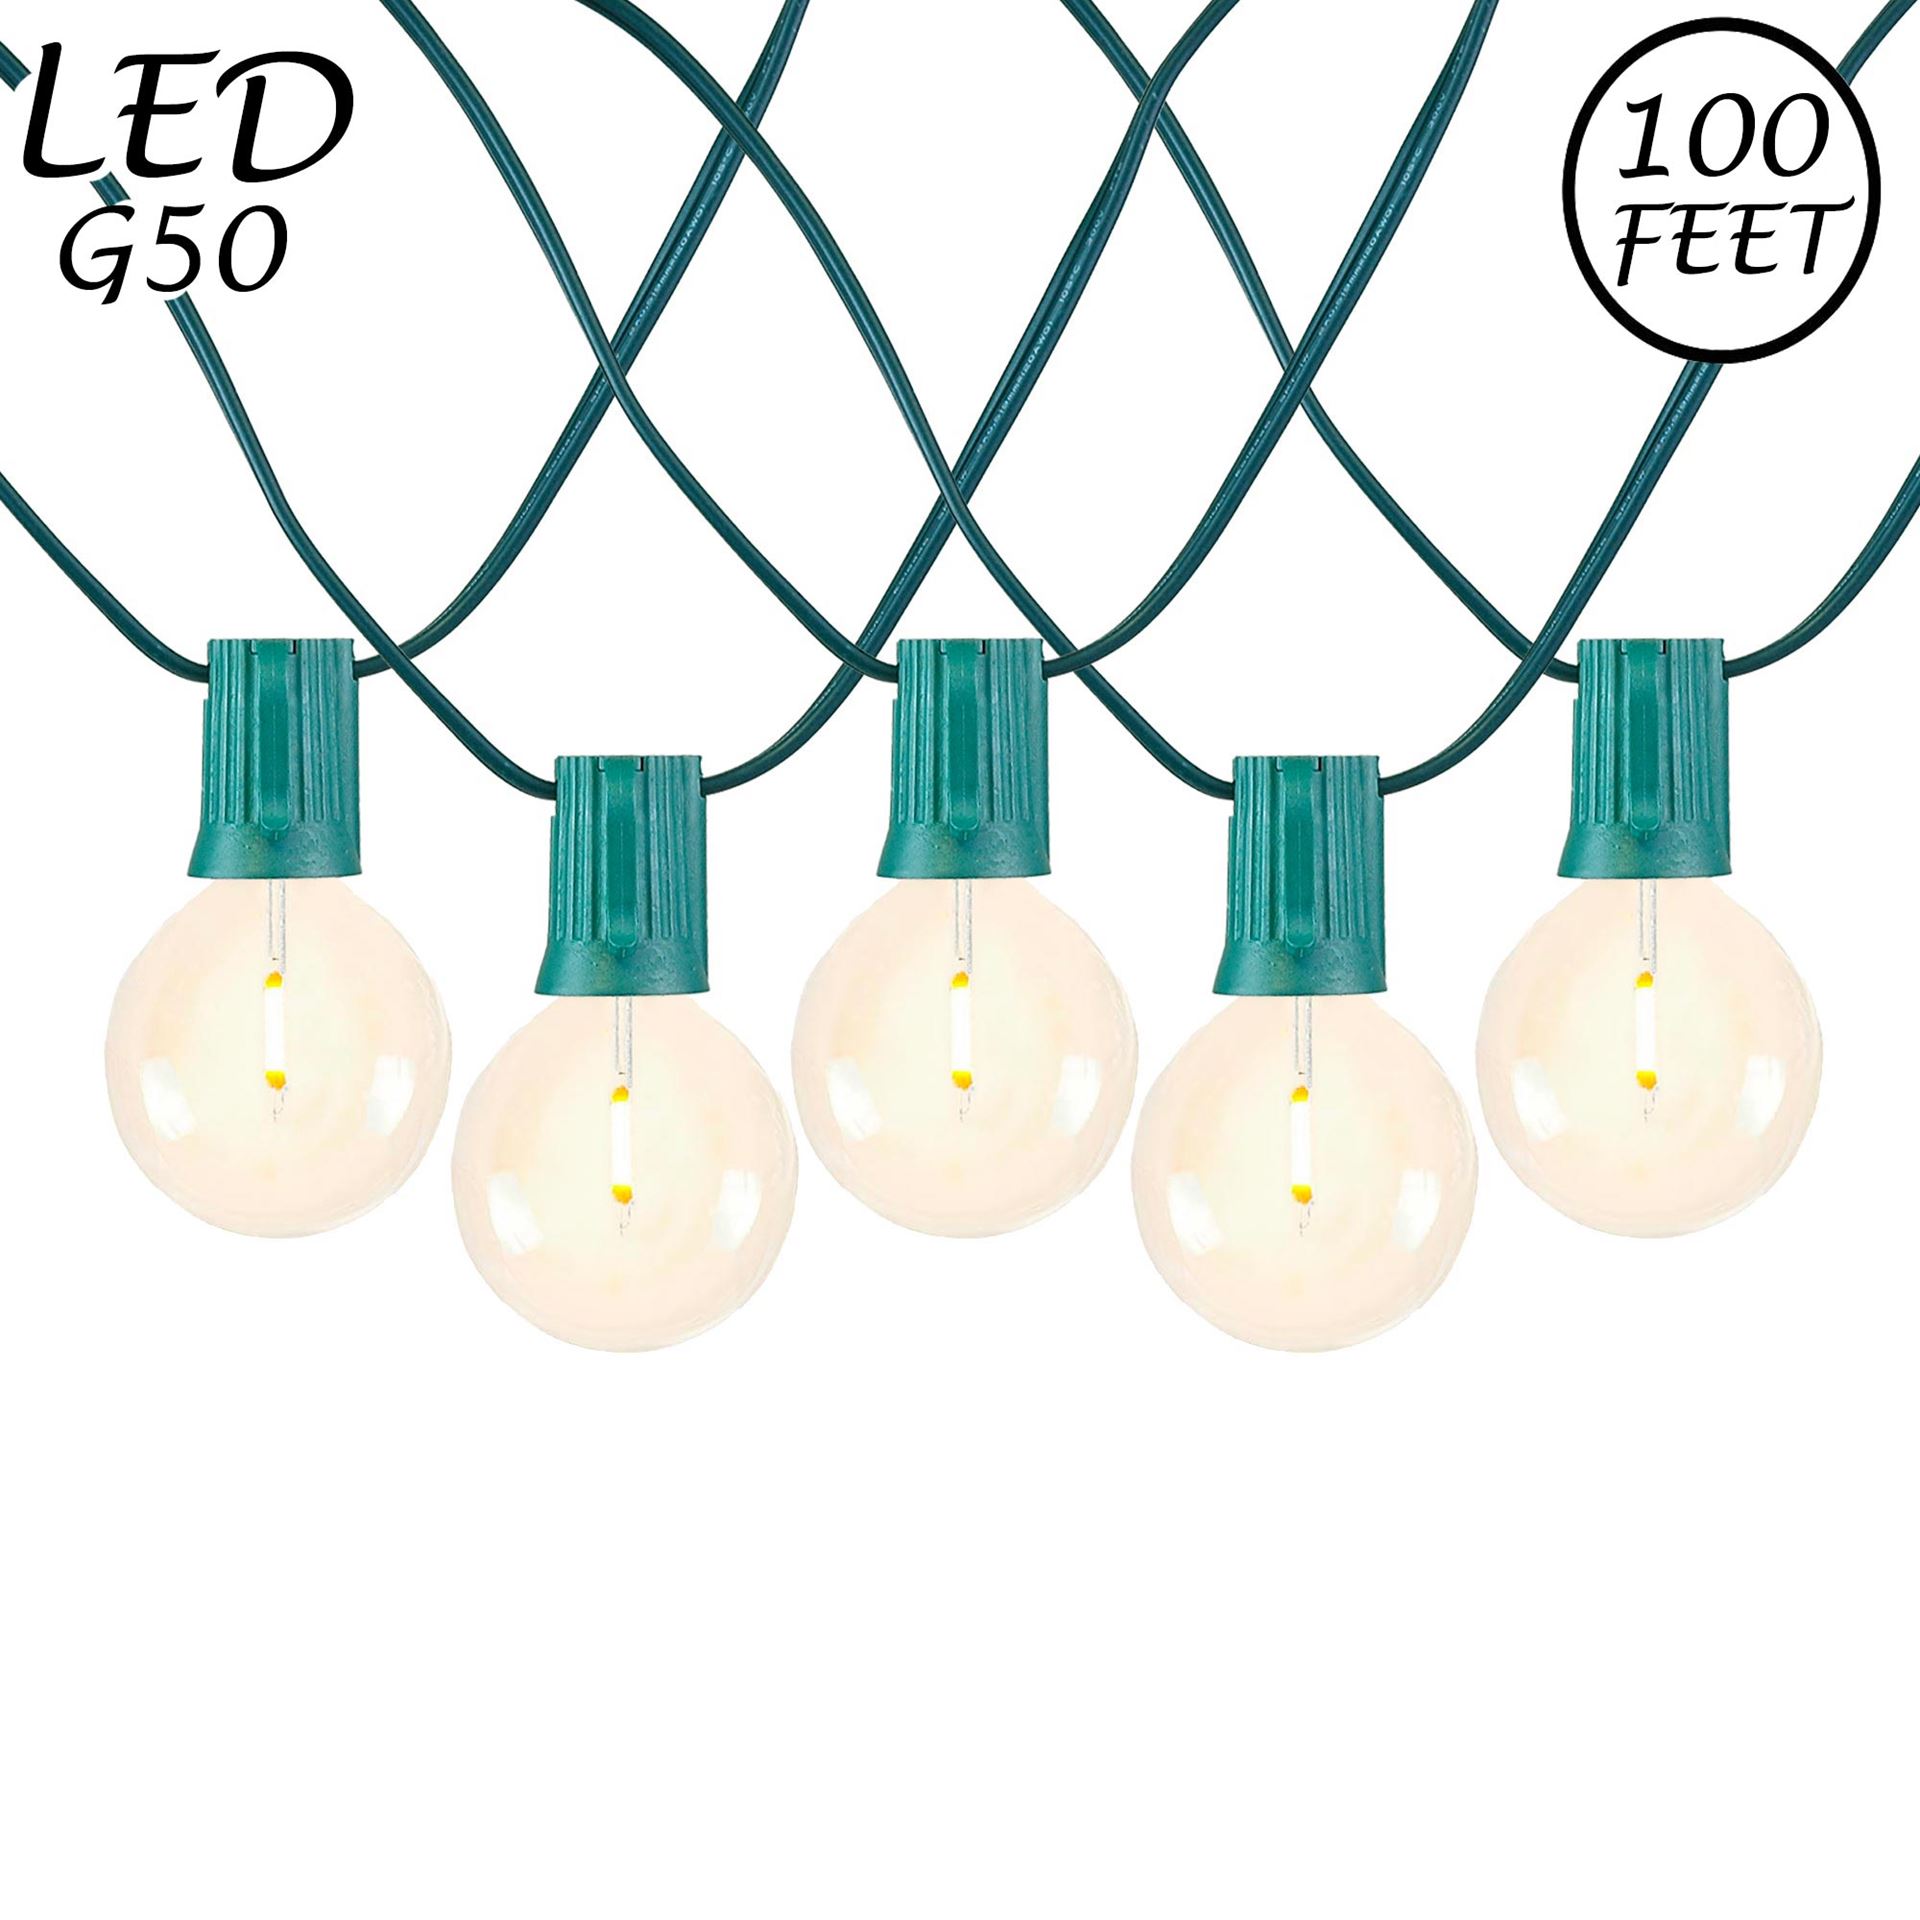 Picture of 67 LED Filament G50 Globe String Light Set with Warm White Bulbs on Green Wire